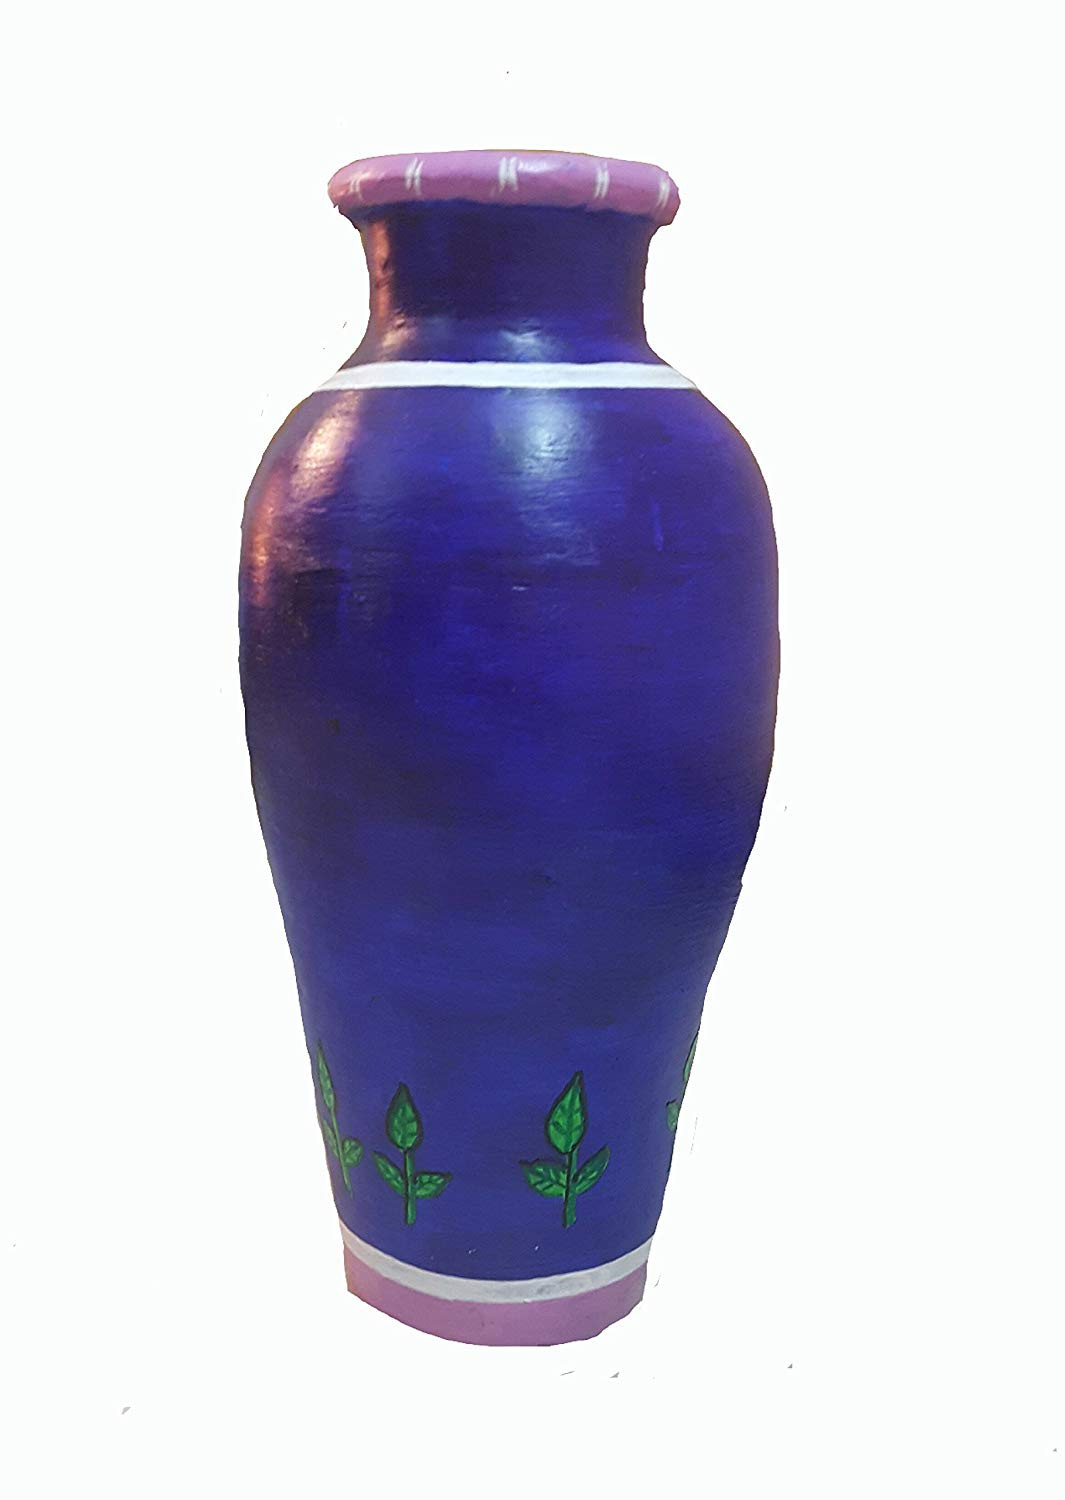 19 Unique Hand Painted Floor Vase 2024 free download hand painted floor vase of buy shree fine arts butterfly hand painted terracotta vase large with regard to buy shree fine arts butterfly hand painted terracotta vase large online at low pric